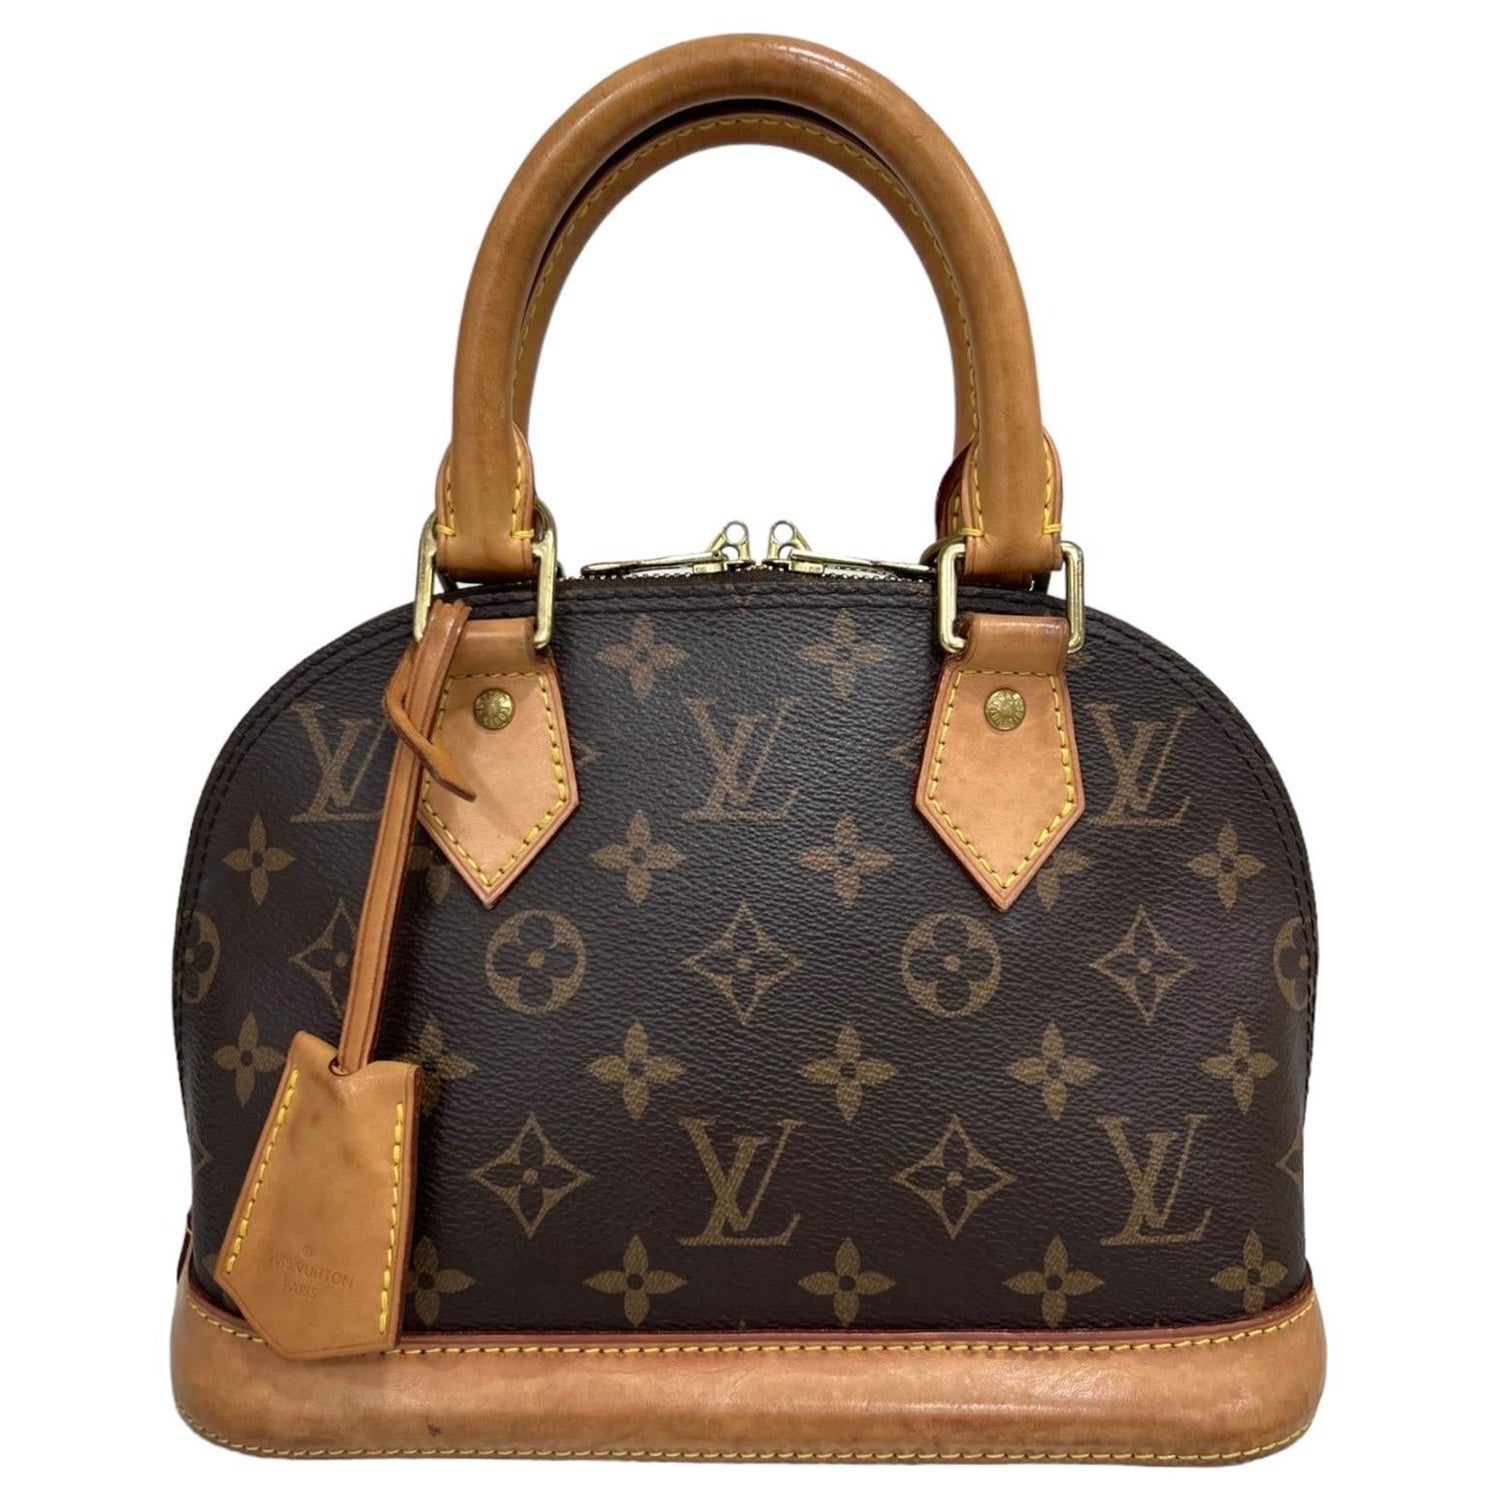 Are Louis Vuitton bags from China real?